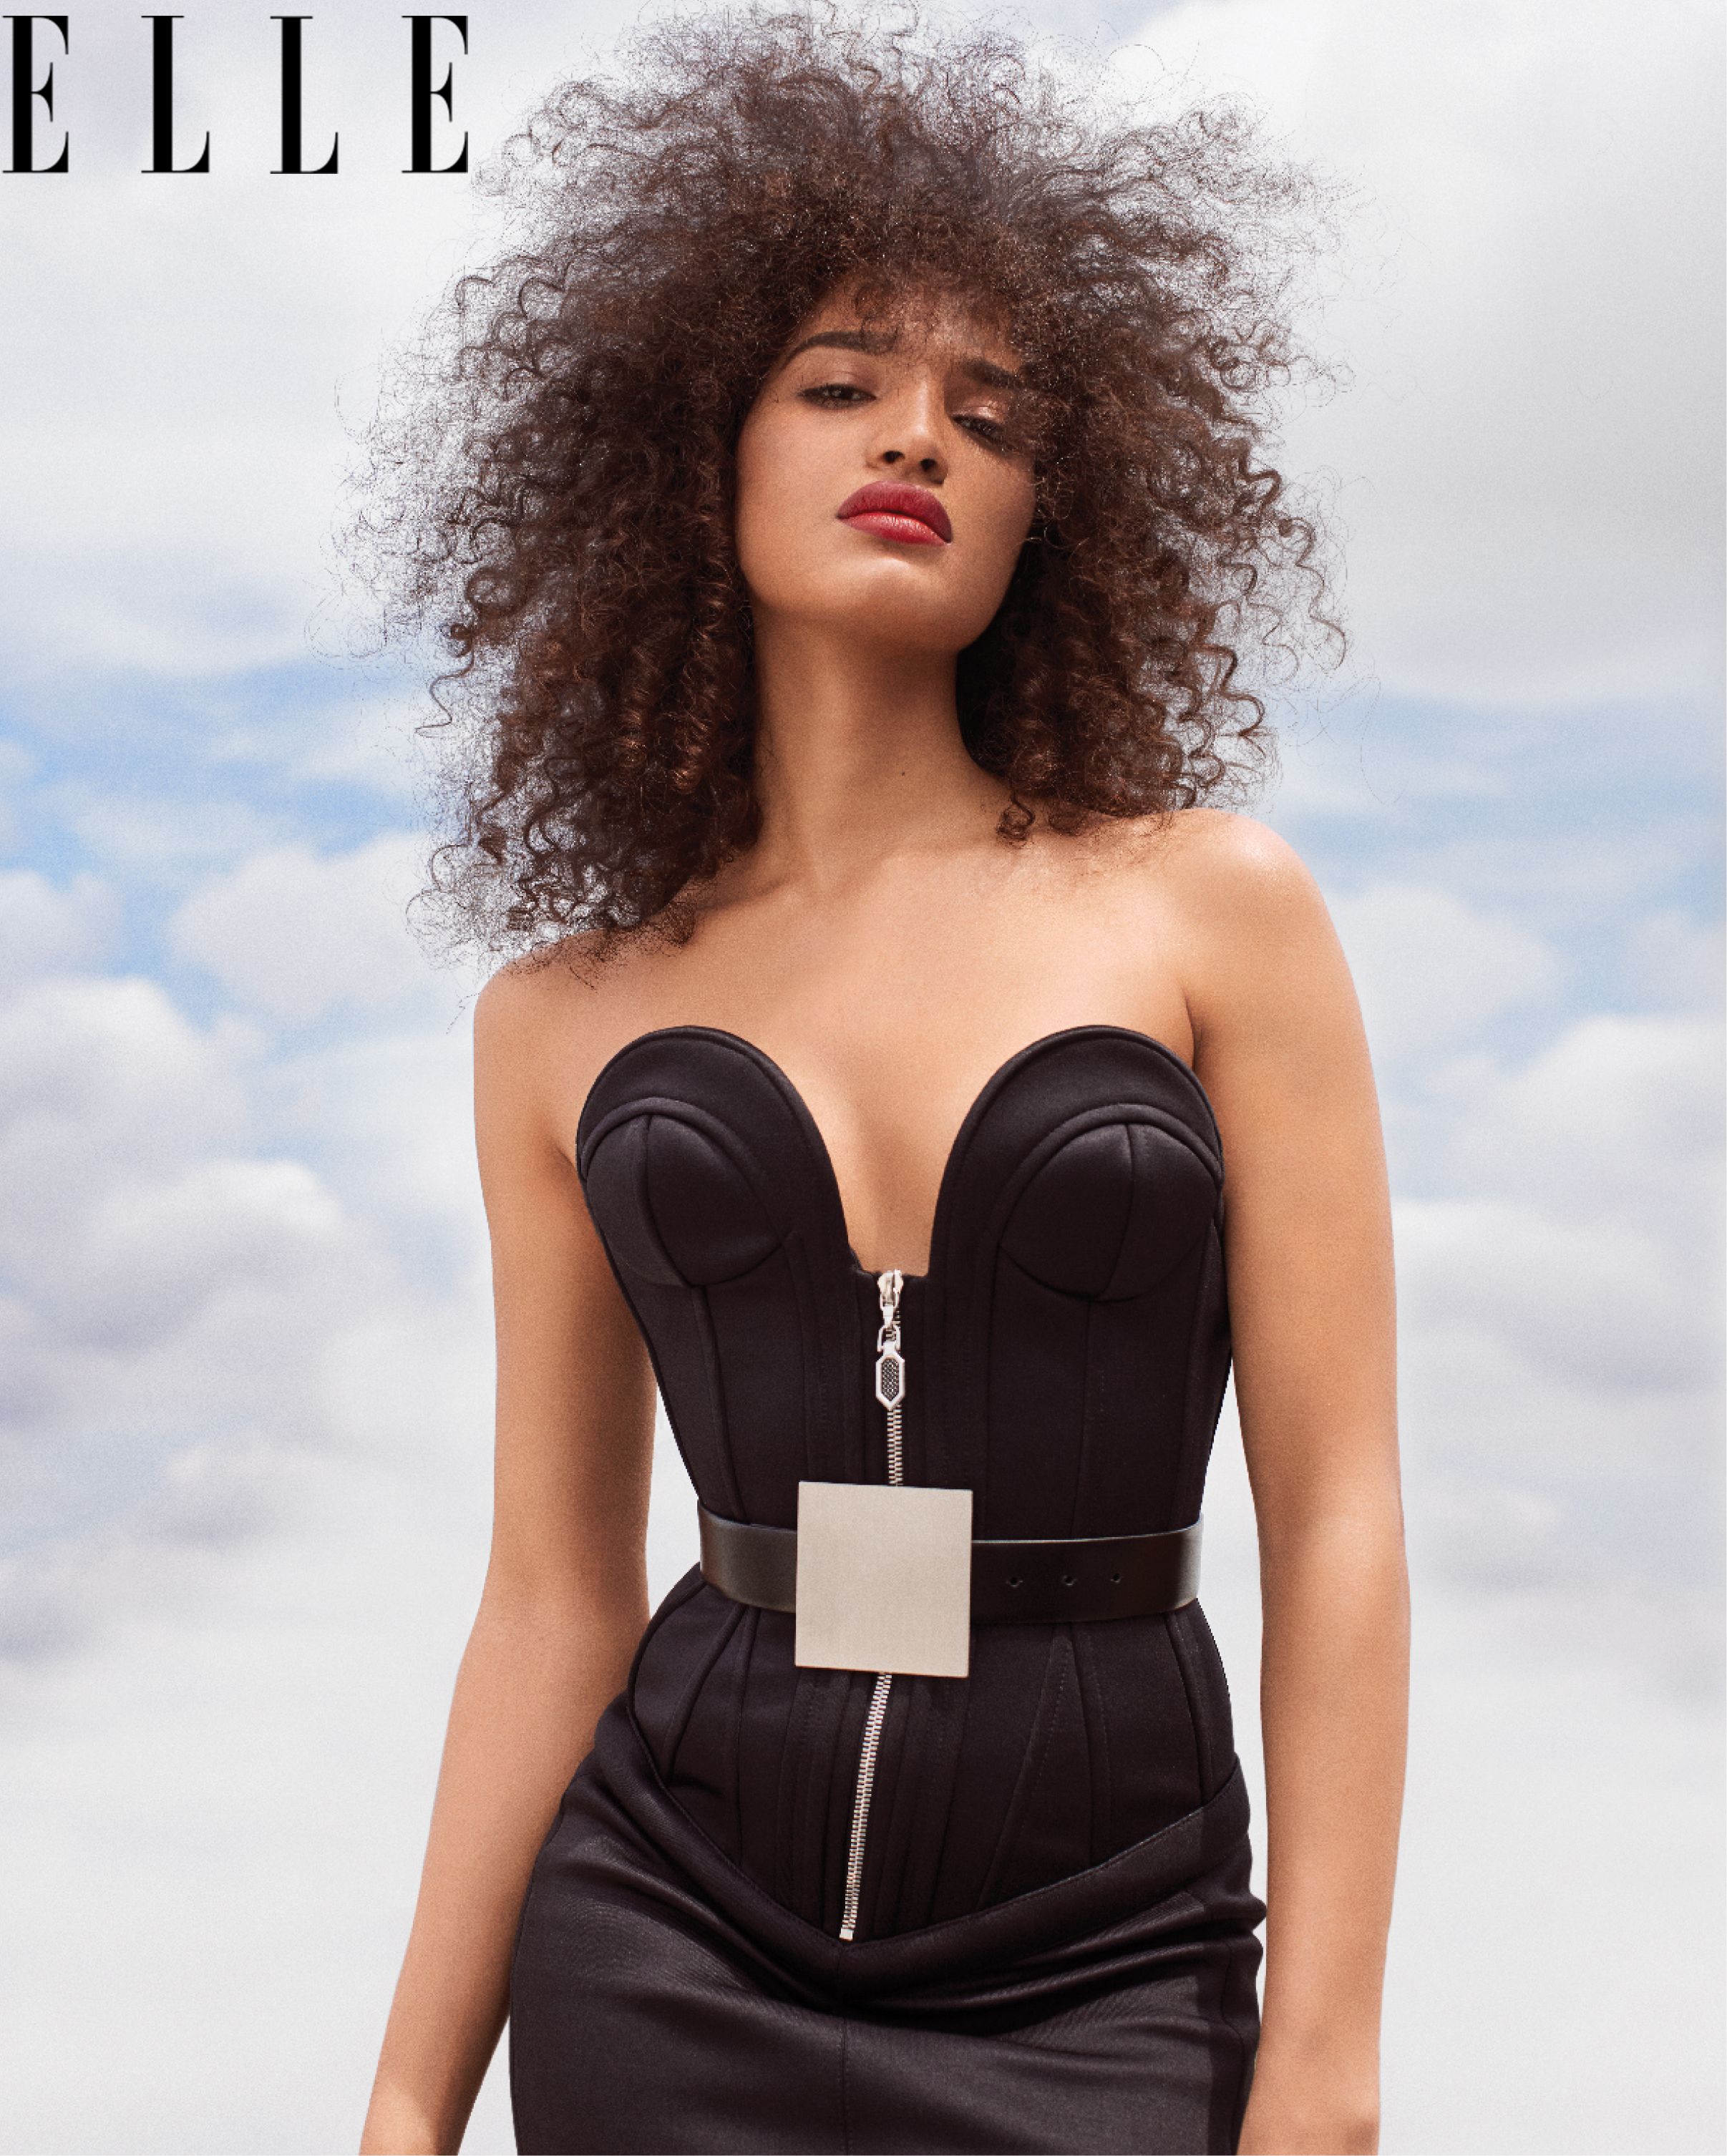 Indya Moore Talks Pose TV Show and Her Journey From Homelessness to Transgender Activist photo picture